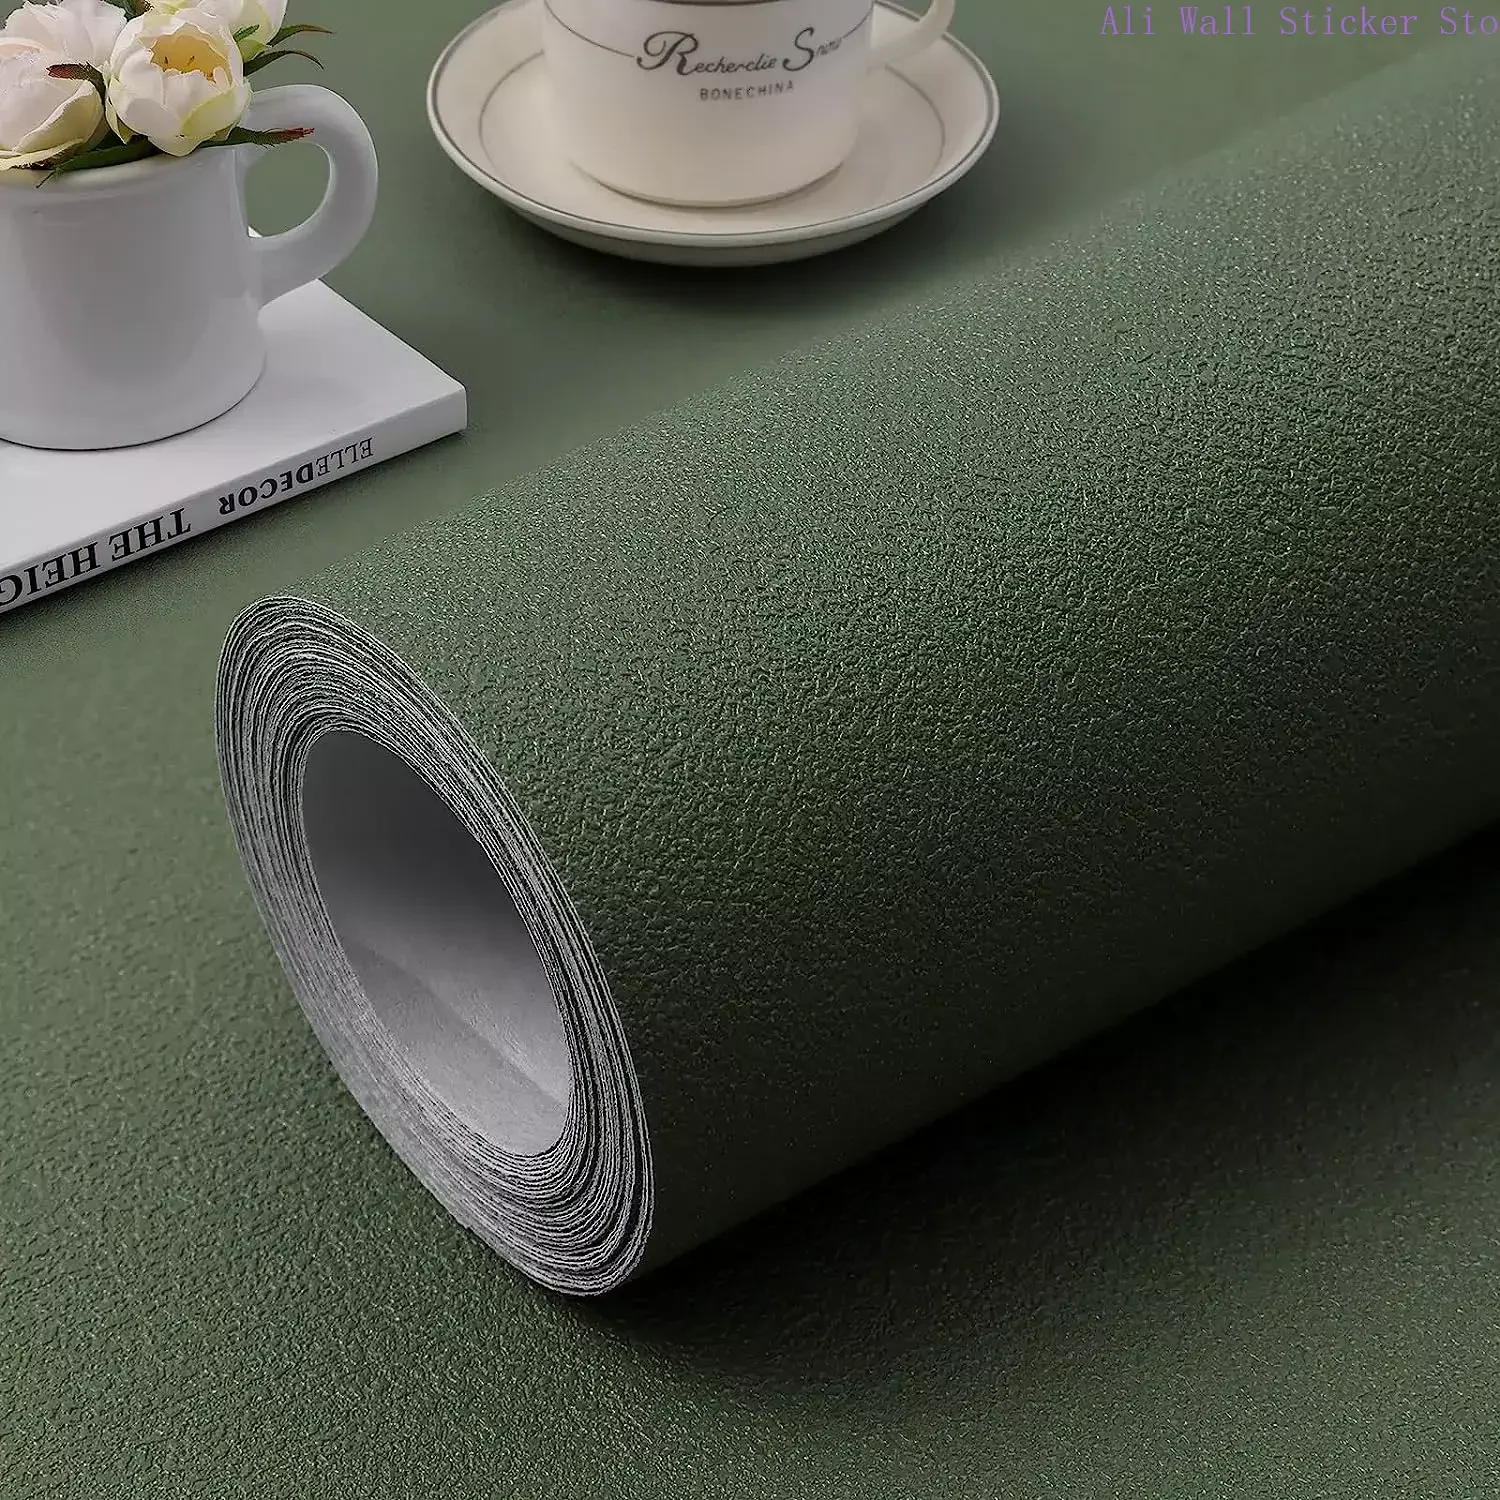 Green Wallpaper Self Adhesive and Removable Vinyl 3D Film Stick Paper To Apply Wall Home Decorative Liner Table and Door Reform 3d door sticker european style arch wall mural art wallpaper poster door stickers pvc self adhesive removable home door decals